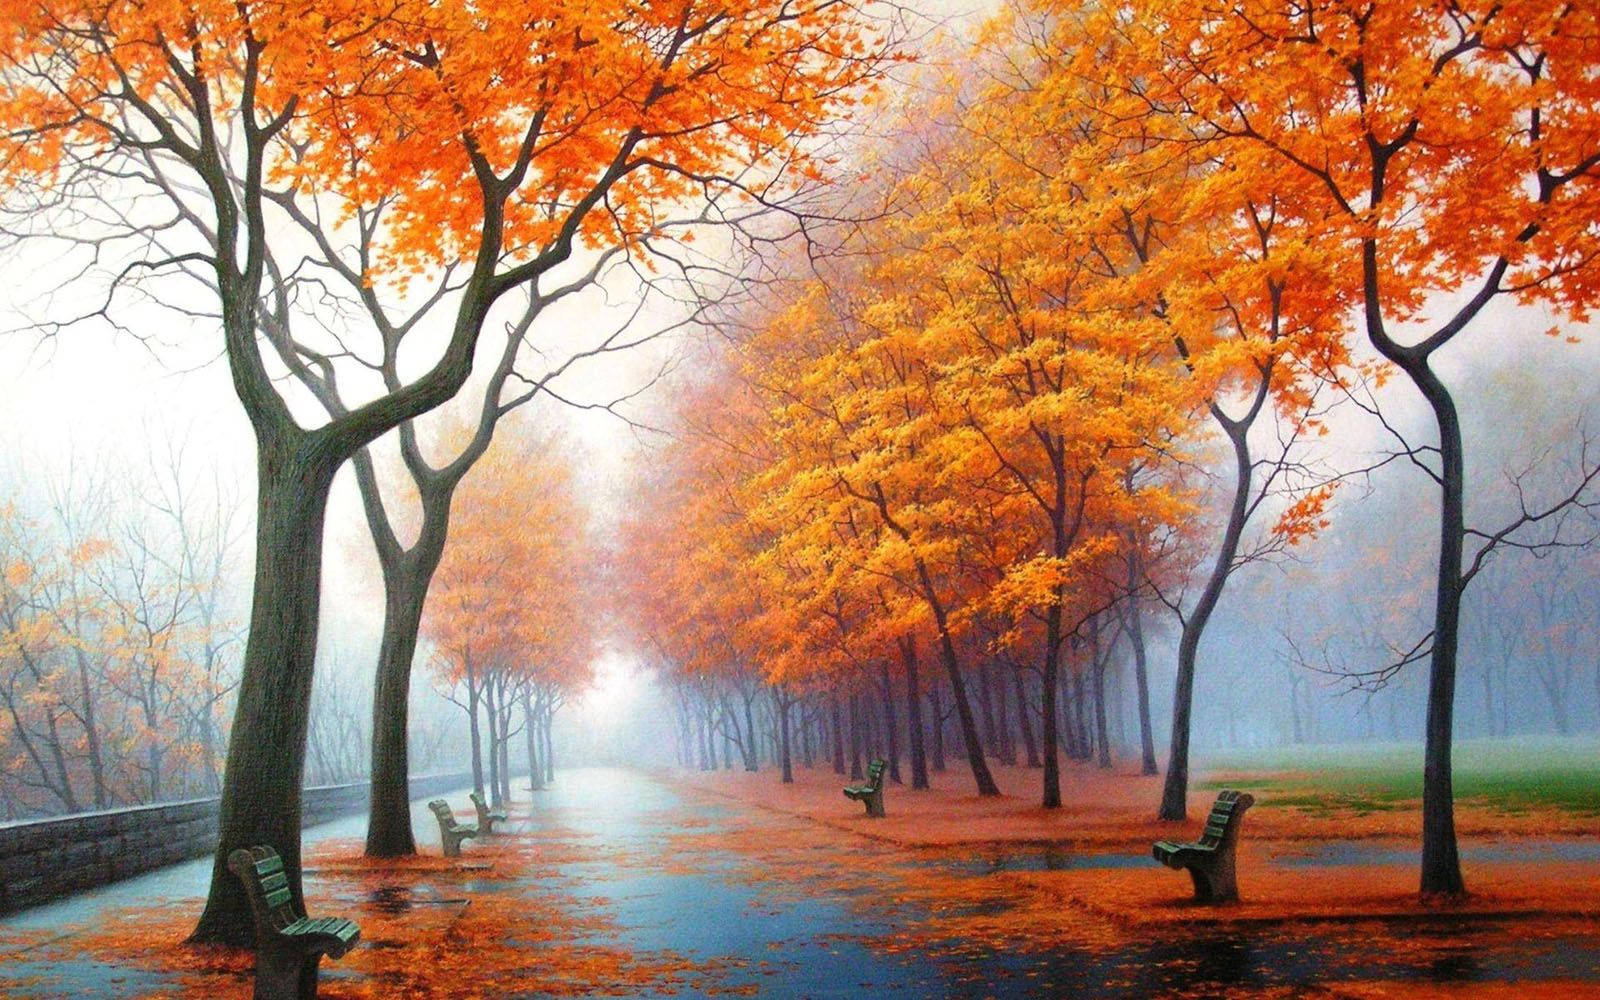 A picturesque view of autumn trees in full blaze of color. Wallpaper